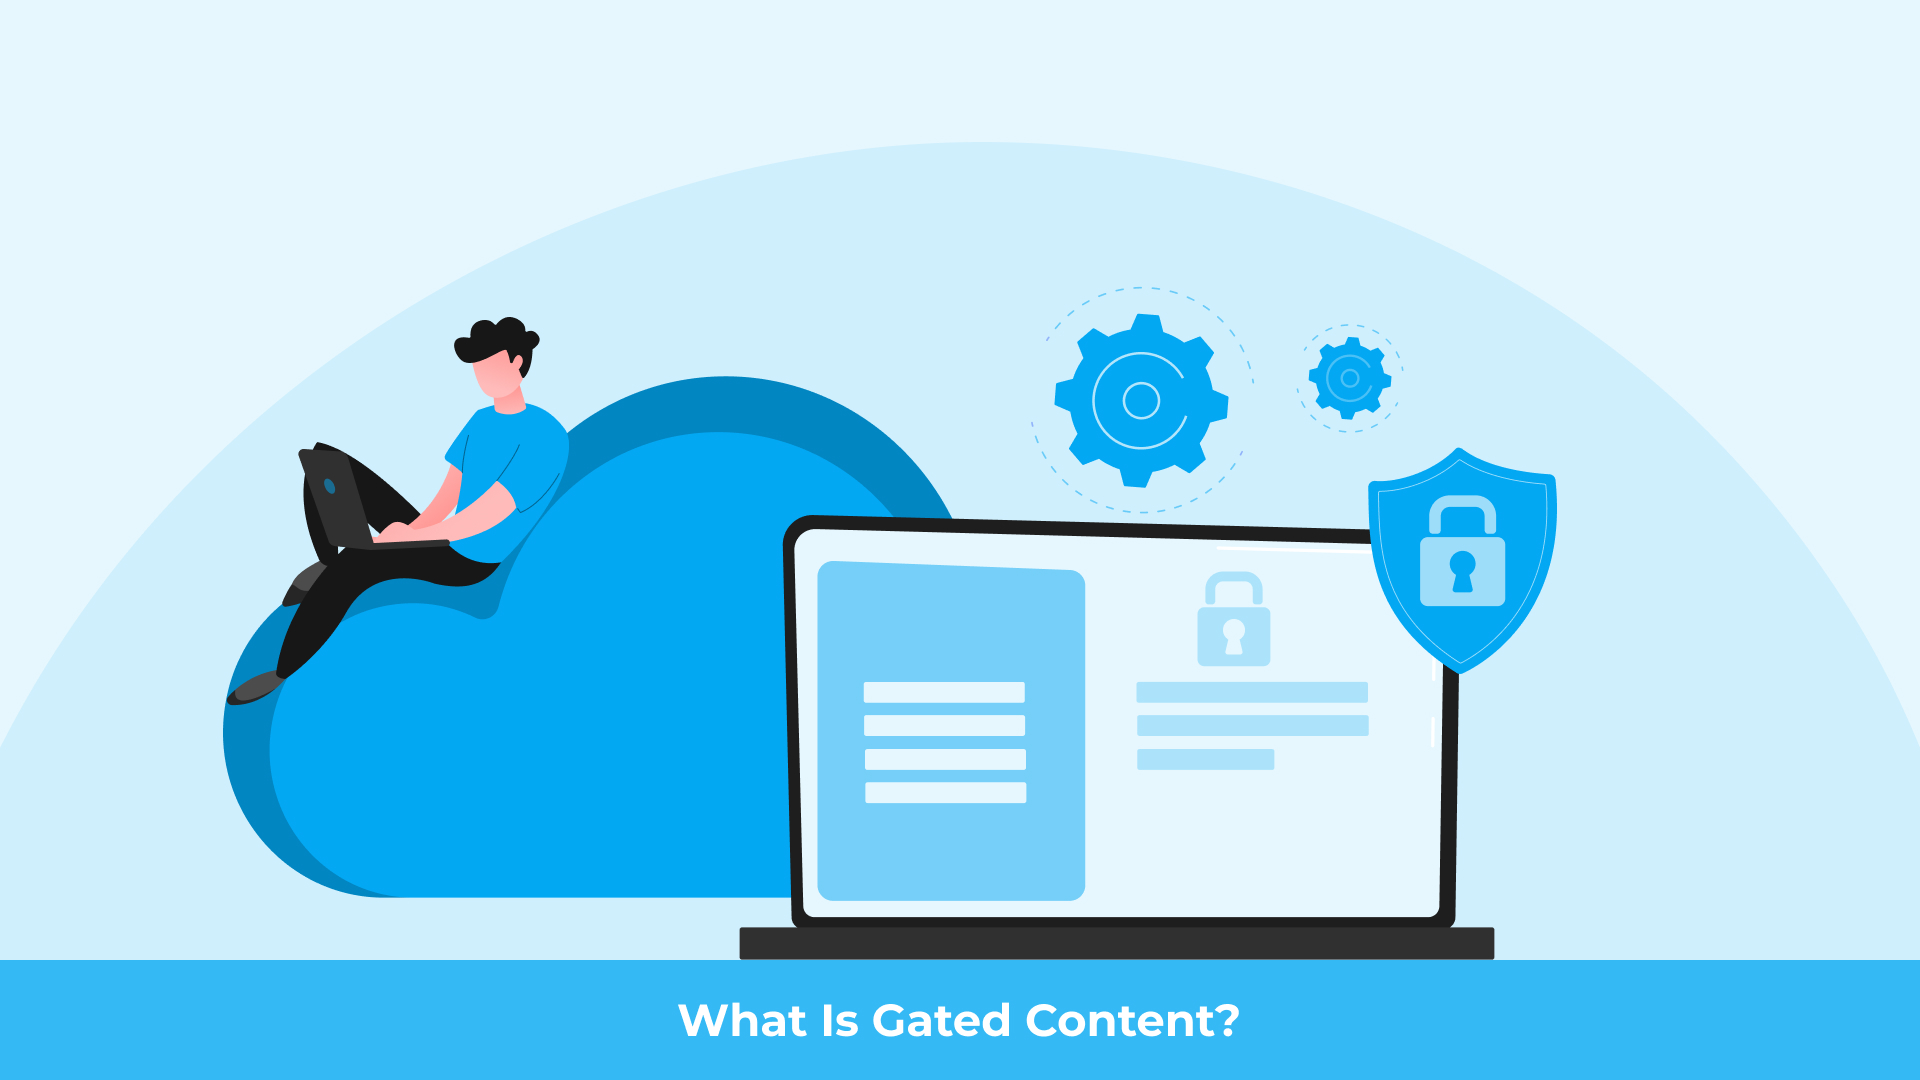 What is Gated Content